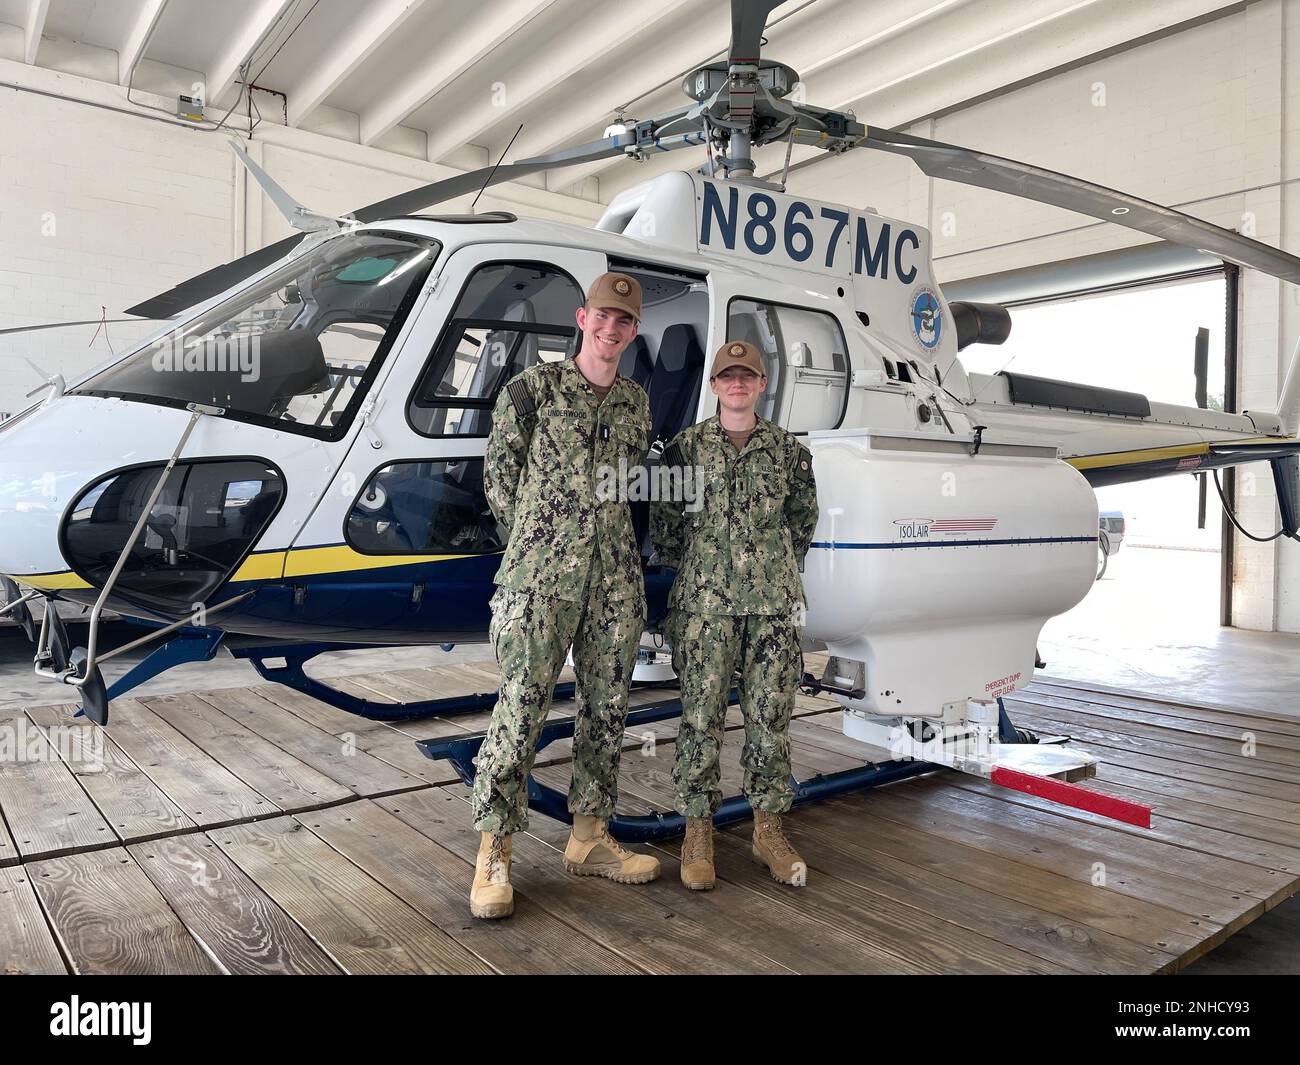 Lee County Mosquito Control District, Lehigh Acres, Fla. (July 28, 2022).  Lt. j.g. Jacob Underwood and Lt. j.g. Sierra Schluep of the Navy Entomology Center of Excellence, in front a helicopter used by Lee County Mosquito Control District for mosquito larval surveillance and treatment. Stock Photo